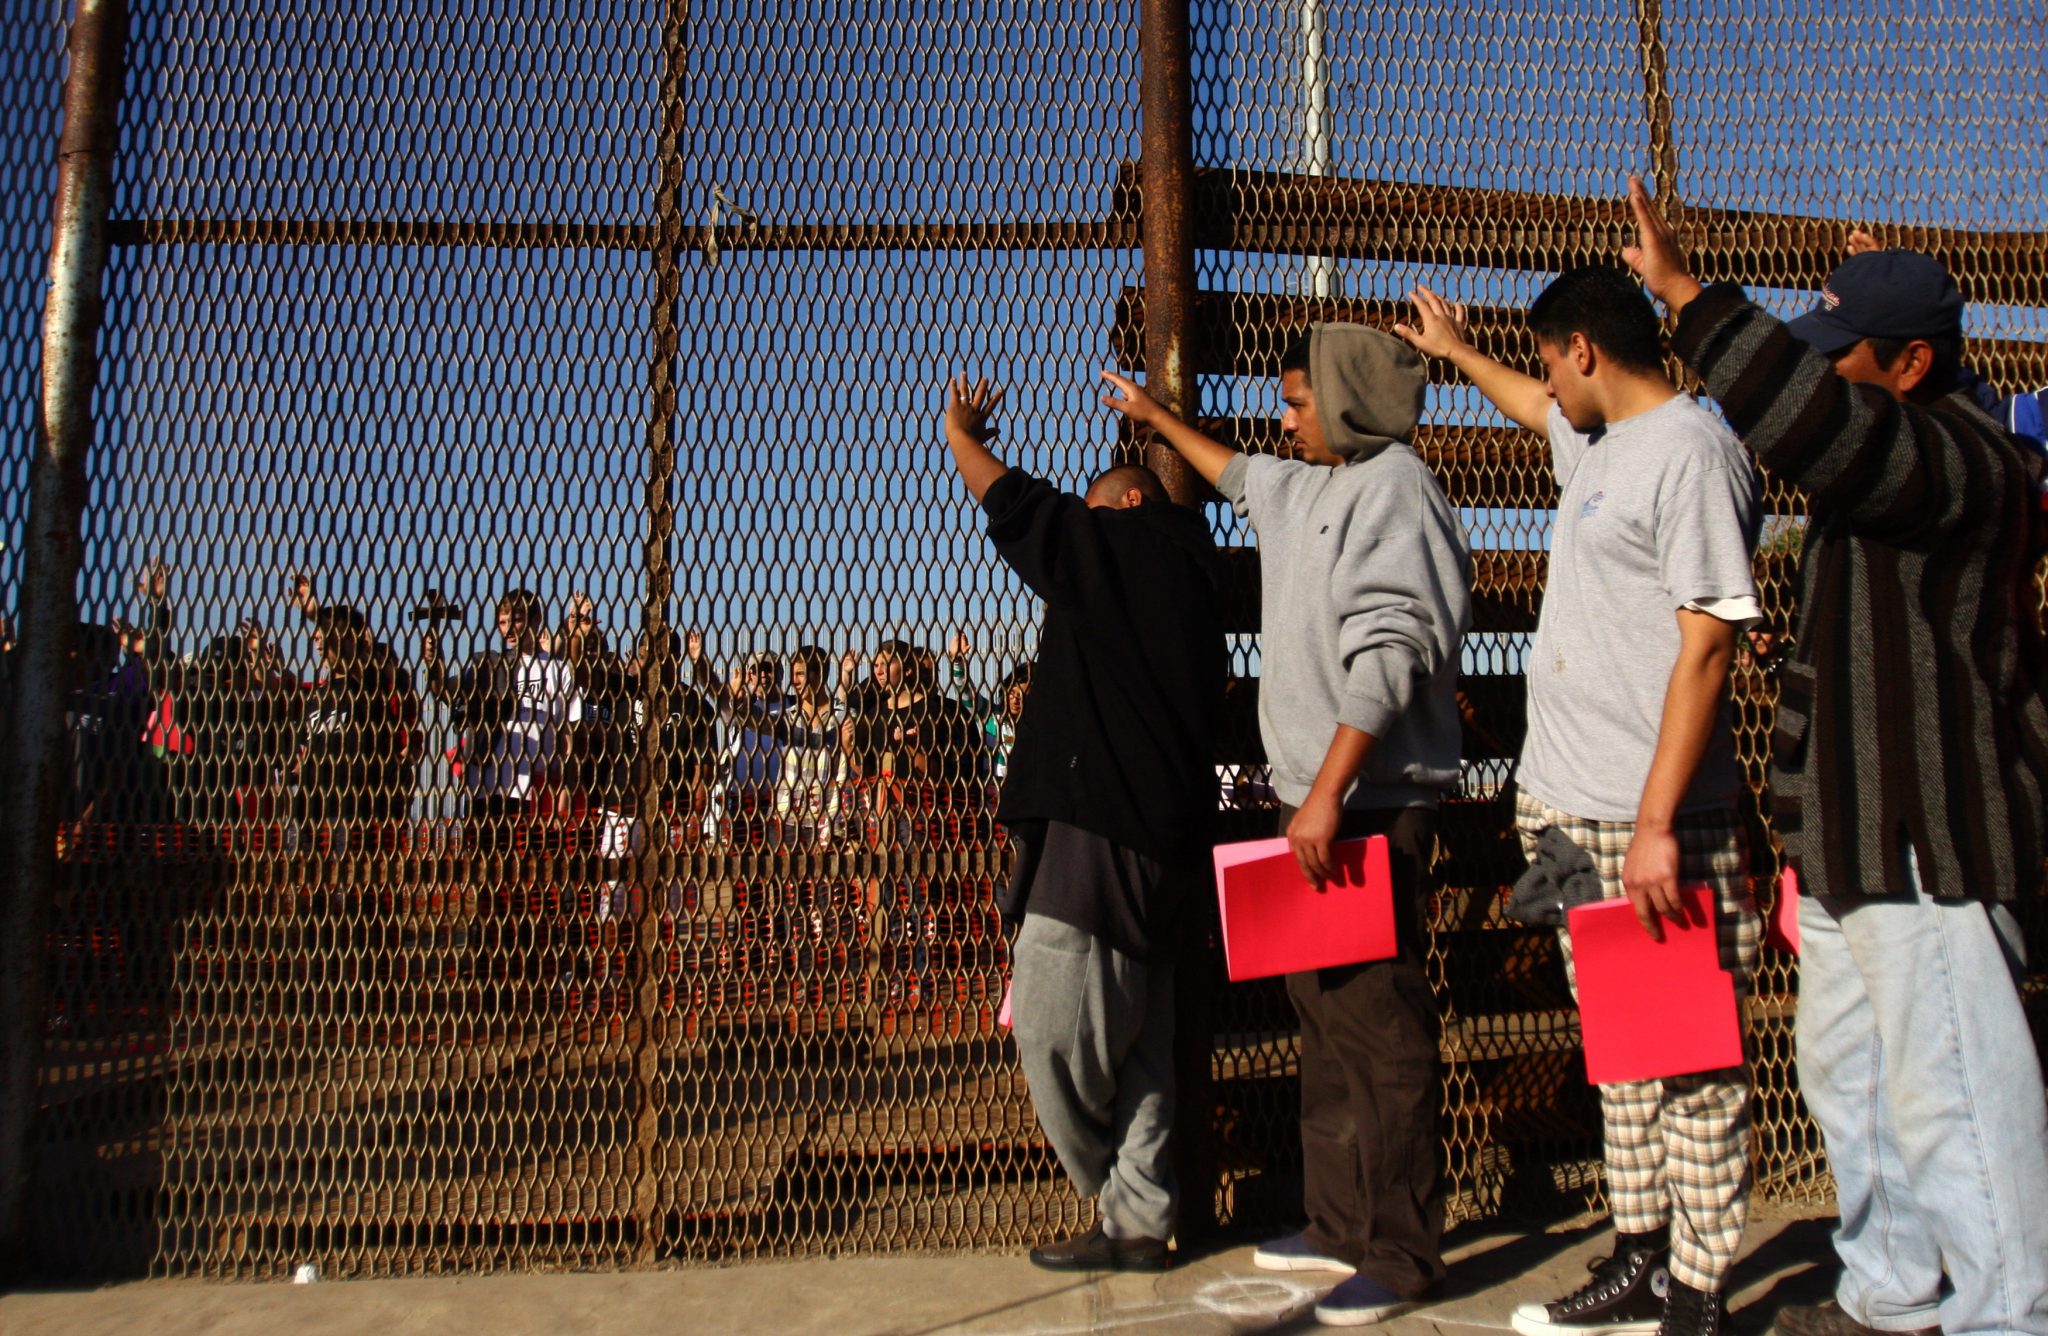 A group of recently deported immigrants stand near the double steel fence that separates San Diego and Tijuana at the border in Tijuana December 10, 2011. Immigrants rights organizations from the U.S and Mexico on Saturday organized an annual pre-Christmas celebration called "Posadas sin Fronteras" or "Christmas without borders", which more than 200 people from both sides attended on the Tijuana and San Diego border. REUTERS/Jorge Duenes (MEXICO - Tags: SOCIETY IMMIGRATION)